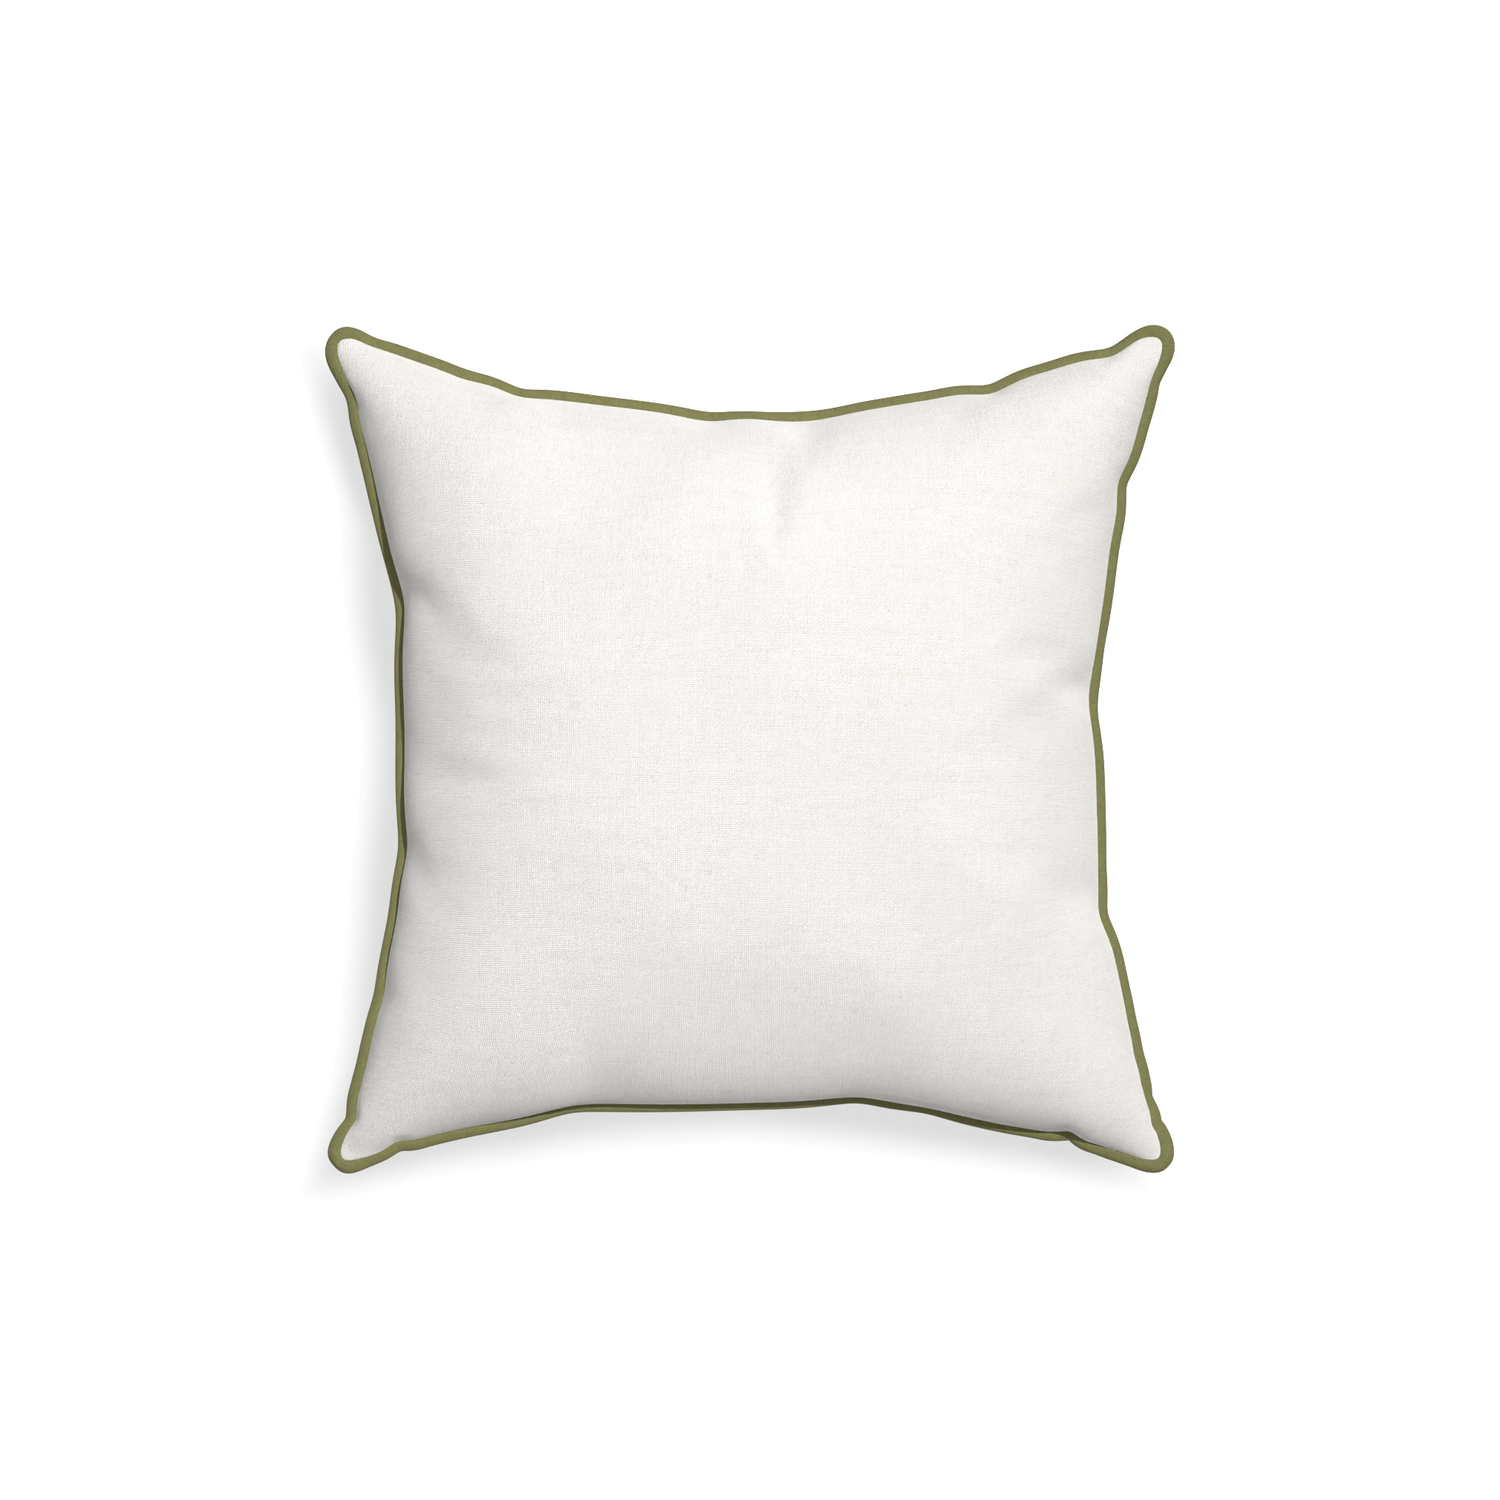 18-square flour custom pillow with moss piping on white background